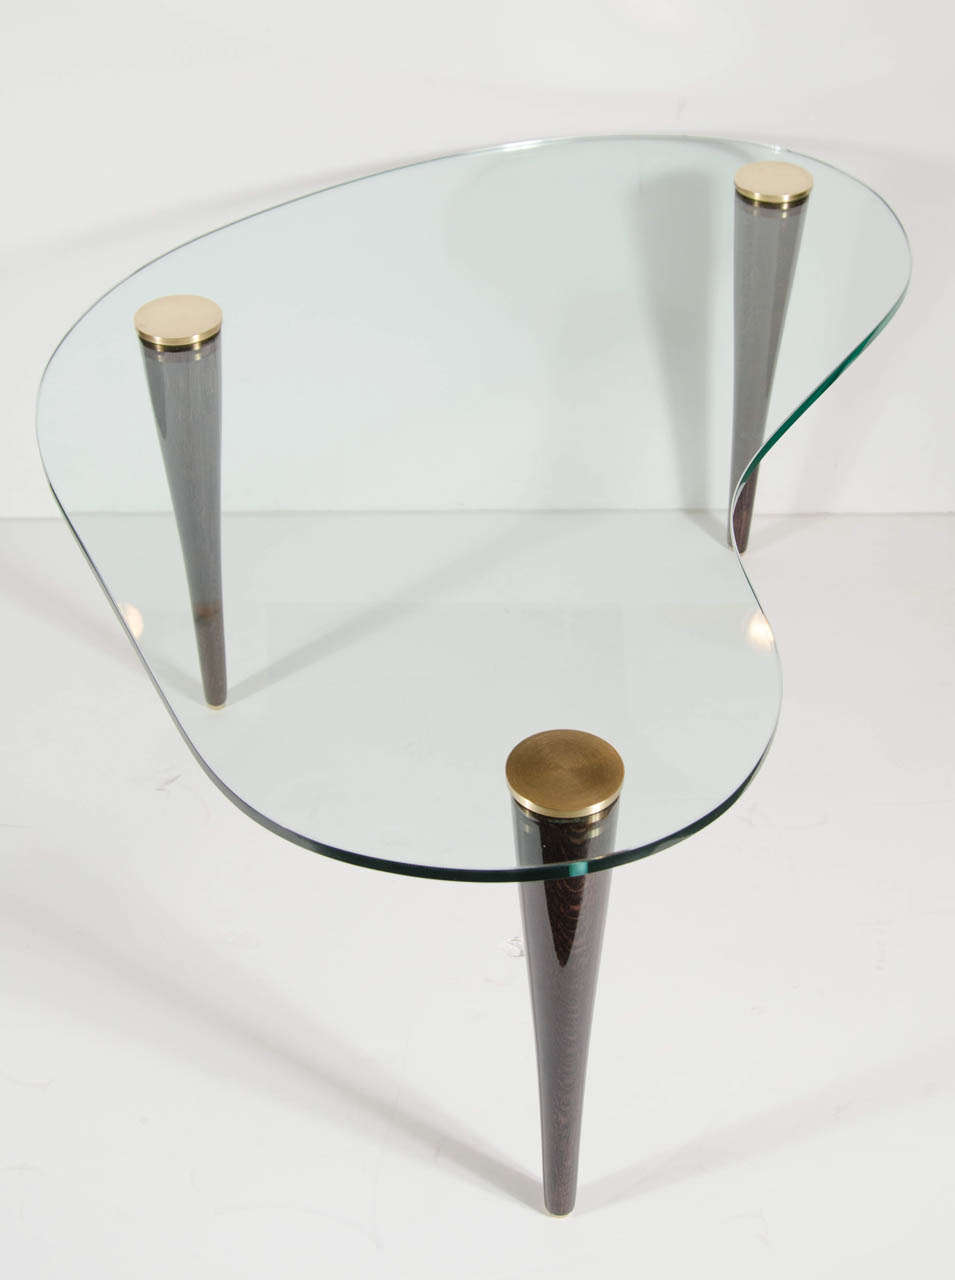 20th Century Art Deco Gilbert Rohde Cloud Cocktail Table